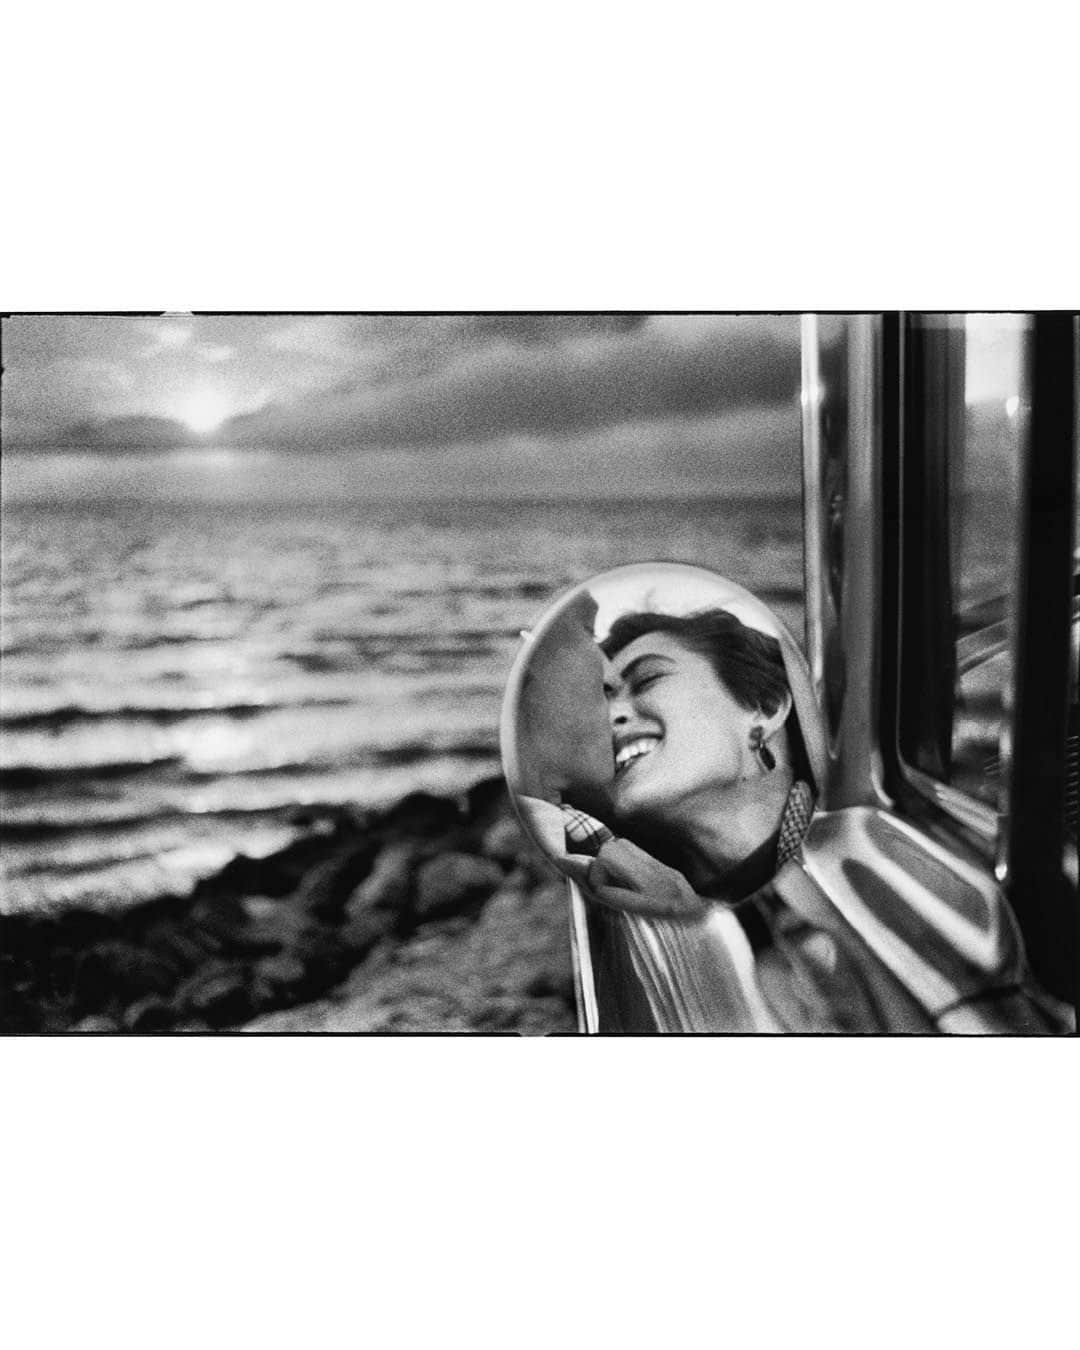 Magnum Photosさんのインスタグラム写真 - (Magnum PhotosInstagram)「Remembering @elliotterwitt (1928-2023), a remarkable photographer and long-time Magnum member whose lens beautifully captured the human experience.⁠ ⁠ Spanning over seven decades, Erwitt’s career leaves an indelible mark on the medium of photography, effortlessly blending the profound with a touch of humor.⁠ ⁠ Erwitt believed photography should speak to the senses and emotions: “When the photograph happens, it comes easily, as a gift that should not be questioned or analyzed.” He preferred not to intellectualize his profession, often stating simply that photography allowed him to pursue his interests while making a living.⁠ ⁠ Dogs held a special place in Erwitt’s heart, offering insights into humanity. In his 1998 book Dog Dogs, he noted, “I don’t know of any other animals closer to us in qualities of heart, sentiment and loyalty.”⁠ ⁠ Love and romance were recurring themes in Erwitt’s work, with iconic shots like a couple kissing in a car’s side mirror and Robert and Mary Frank dancing in a kitchen resonating across generations.⁠ ⁠ Throughout his career, Erwitt captured notable figures like Marilyn Monroe, Grace Kelly, Jack Kerouac, John F. Kennedy and Jackie Kennedy. He witnessed and documented pivotal moments in history, from the 1959 Kitchen Debate between Nikita Khrushchev and Richard Nixon to portraits of Fidel Castro and Che Guevara in 1964.⁠ ⁠ 🔗 We reflect on the life and work of the legendary Magnum image-maker at the link in the @magnumphotos bio.⁠ ⁠ PHOTOS (left to right):⁠ ⁠ (1) Provence, France. 1955.⁠ ⁠ (2) Marilyn Monroe. New York, USA. 1956. ⁠ ⁠ (3) New York, USA. 1974.⁠ ⁠ (4) Nikita Khrushchev and Richard Nixon. The Kitchen Debate. Moscow, USSR. 1959. ⁠ ⁠ (5) Eiffel tower 100th anniversary. Paris, France. 1989. ⁠ ⁠ (6) Berkeley, California, USA. 1956.⁠ ⁠ (7) Prado Museum. Madrid, Spain. 1995. ⁠ ⁠ (8) Che Guevara. Havana, Cuba. 1964. ⁠ ⁠ (9) New York City, USA. 2000.⁠ ⁠ (10) Valencia, Spain. 1952.⁠ ⁠ © @elliotterwitt / Magnum Photos」12月1日 21時45分 - magnumphotos